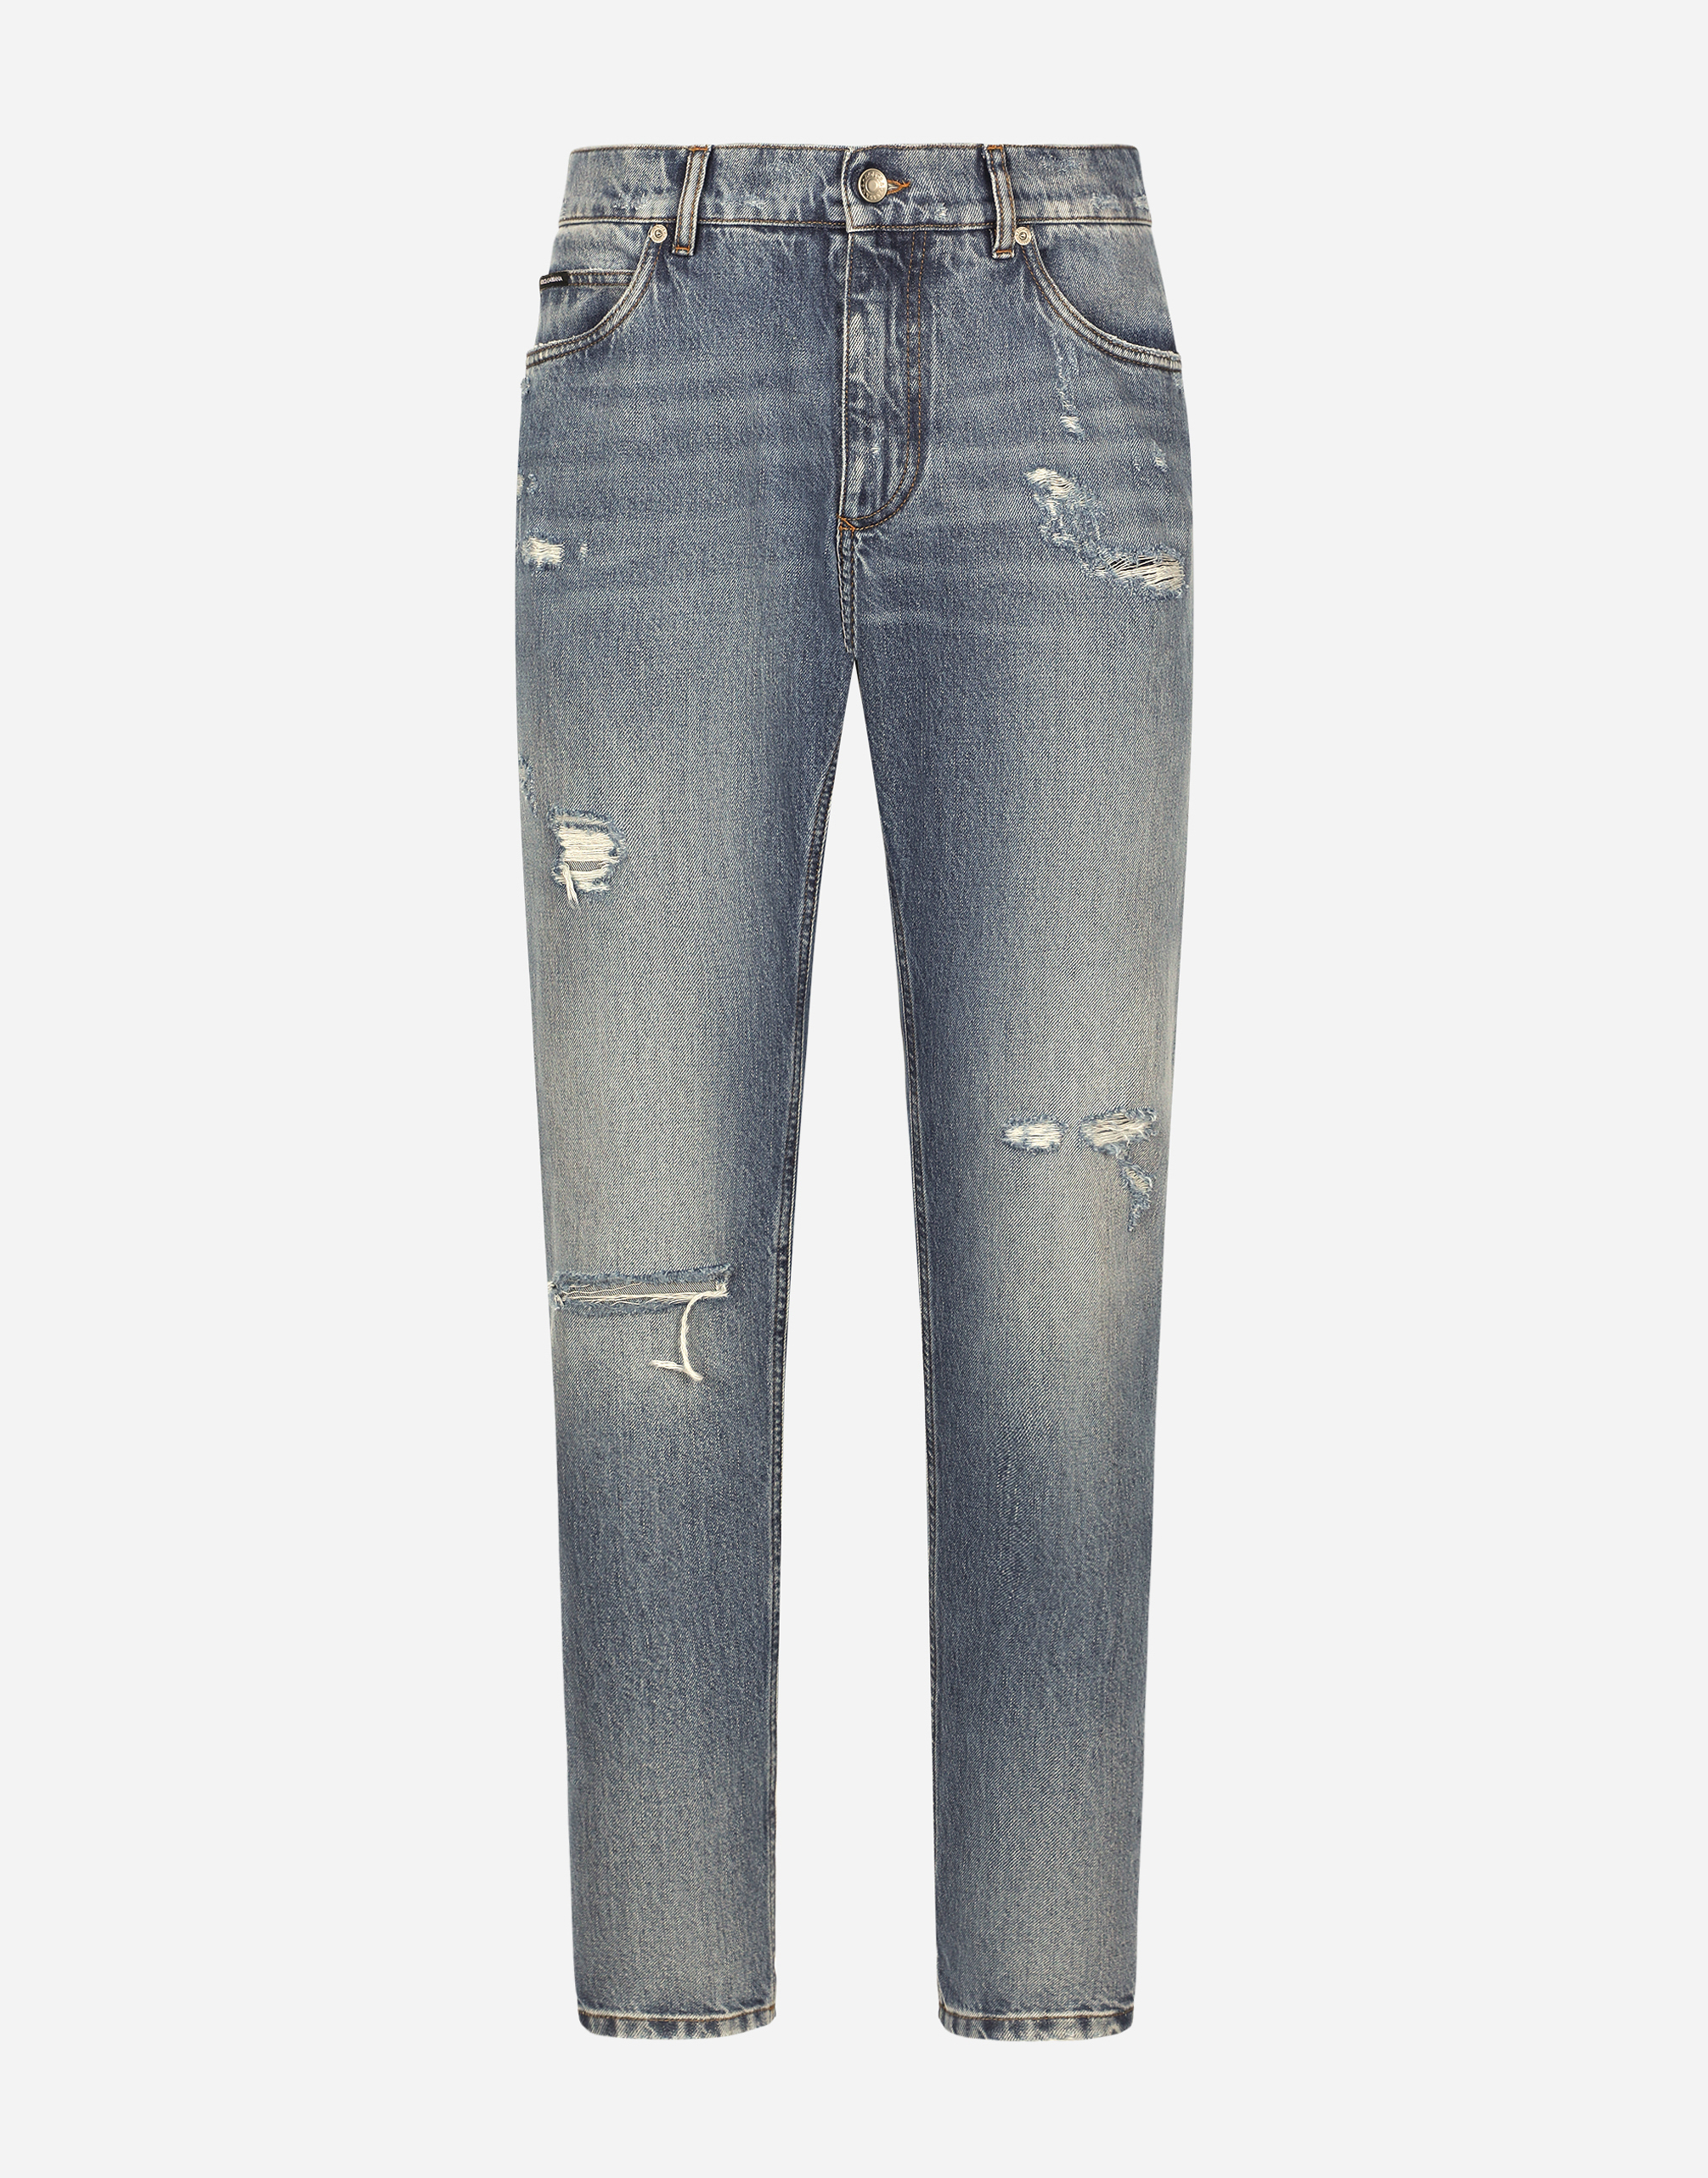 Dolce & Gabbana Regular-fit Blue Wash Jeans With Abrasions